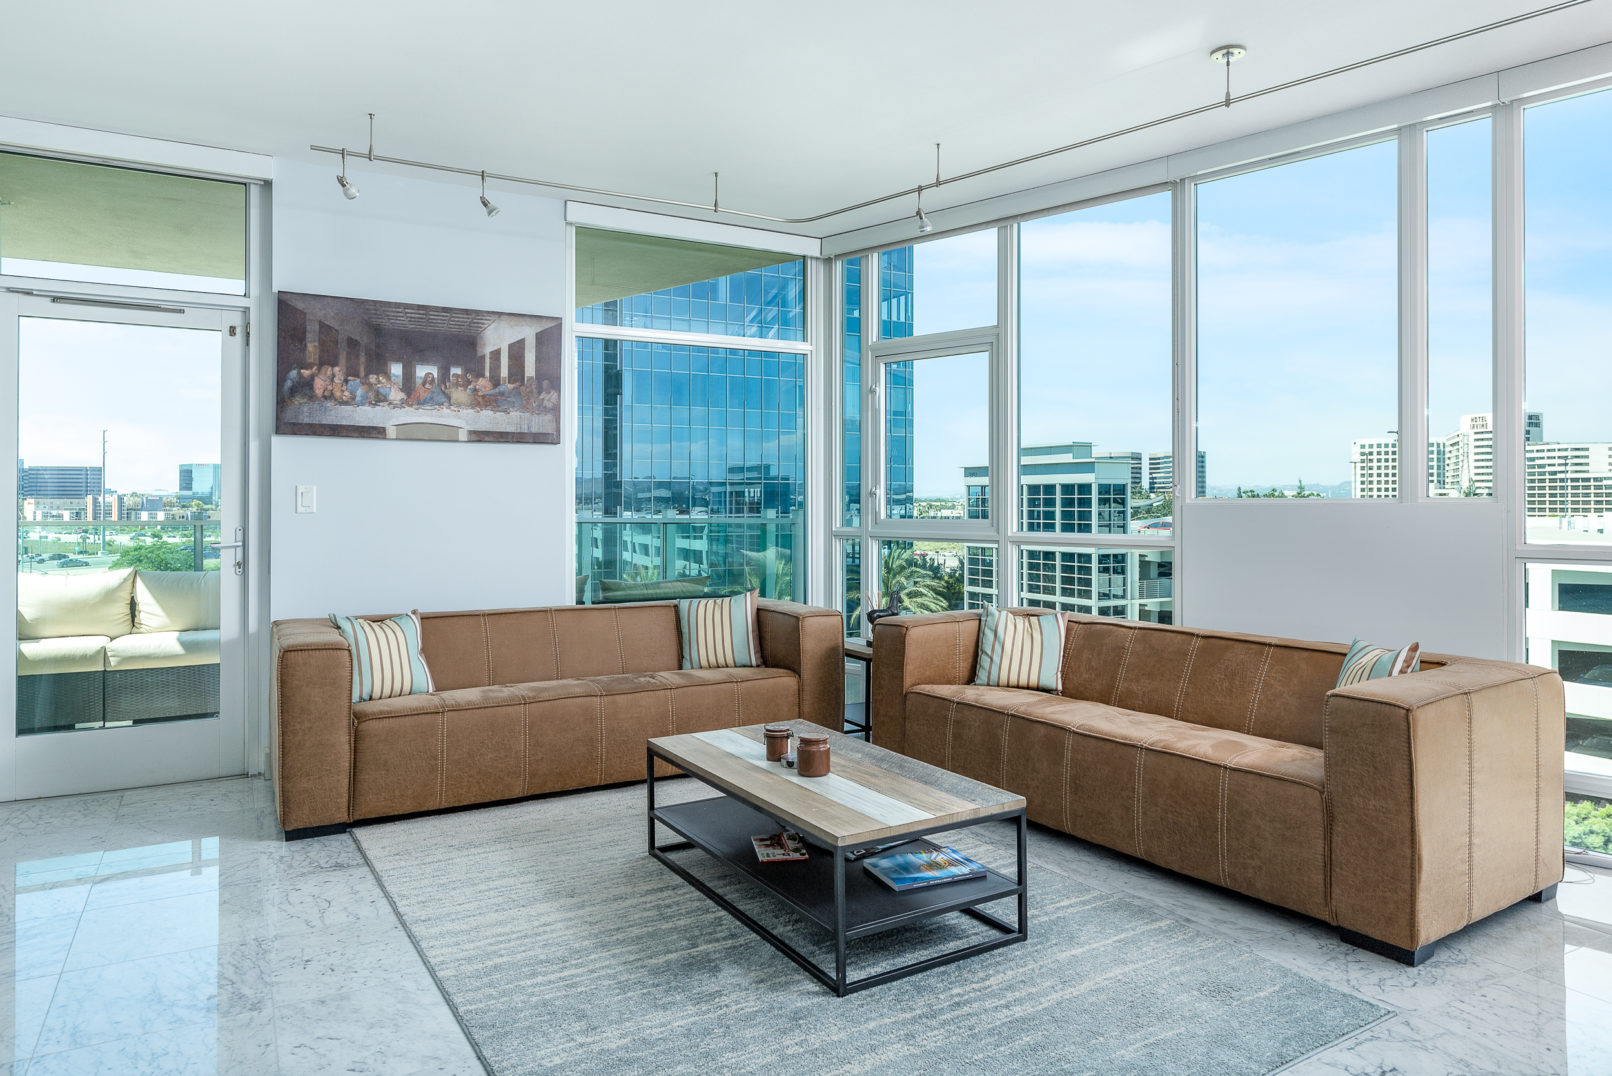 Orange County Real Estate Photographer Photographed Living Room in an Irvine California Luxury High Rise